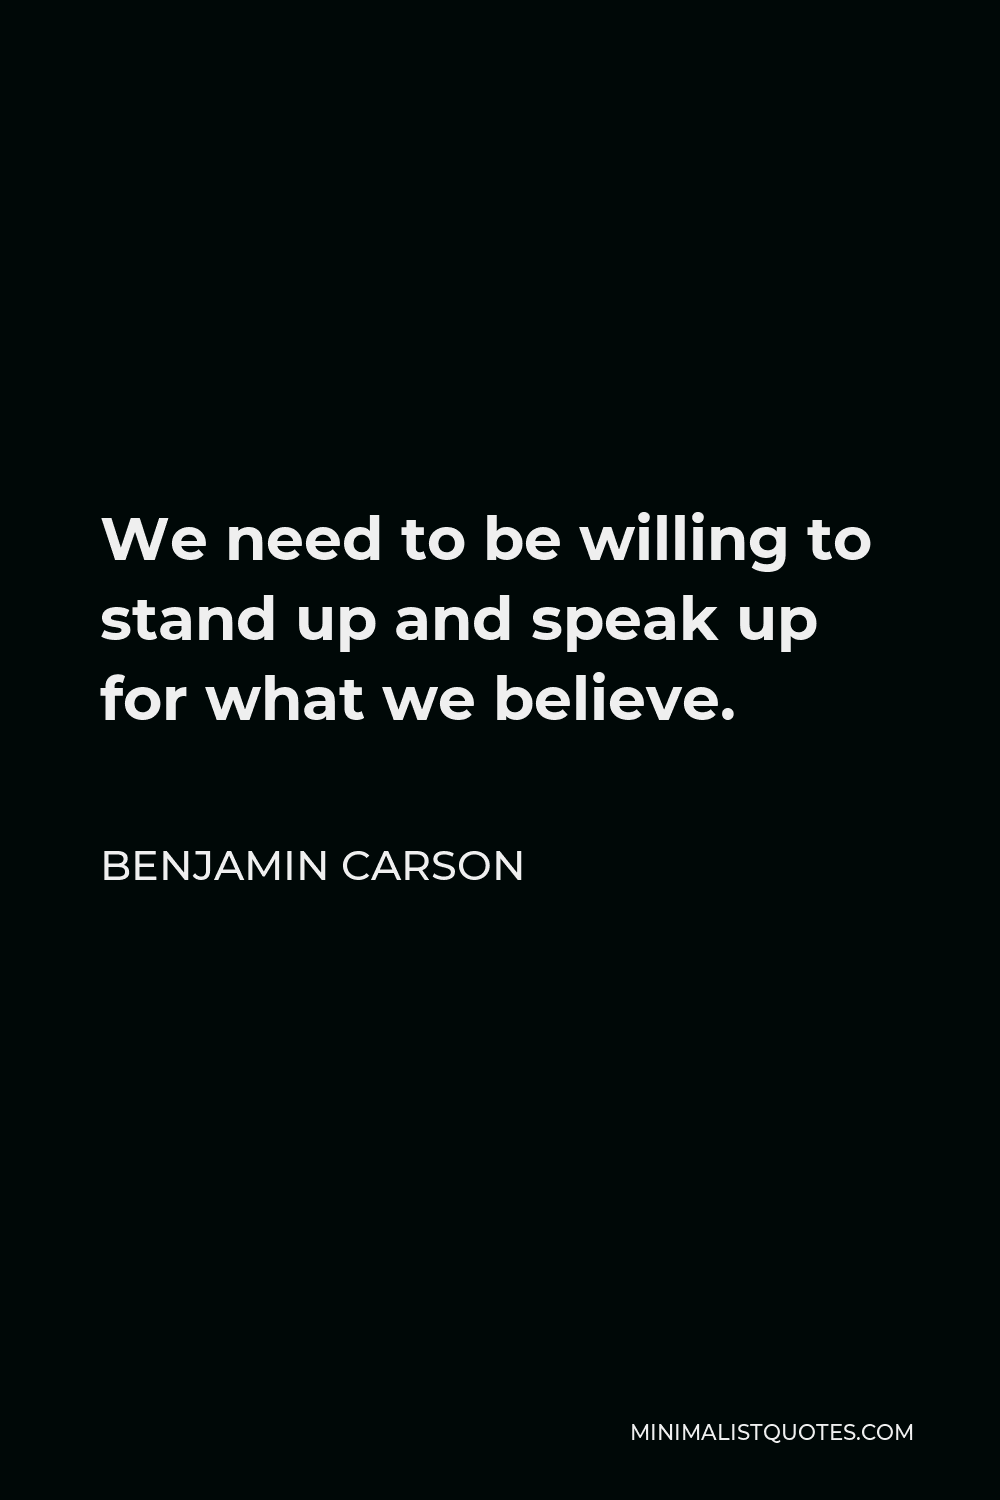 Benjamin Carson Quote - We need to be willing to stand up and speak up for what we believe.